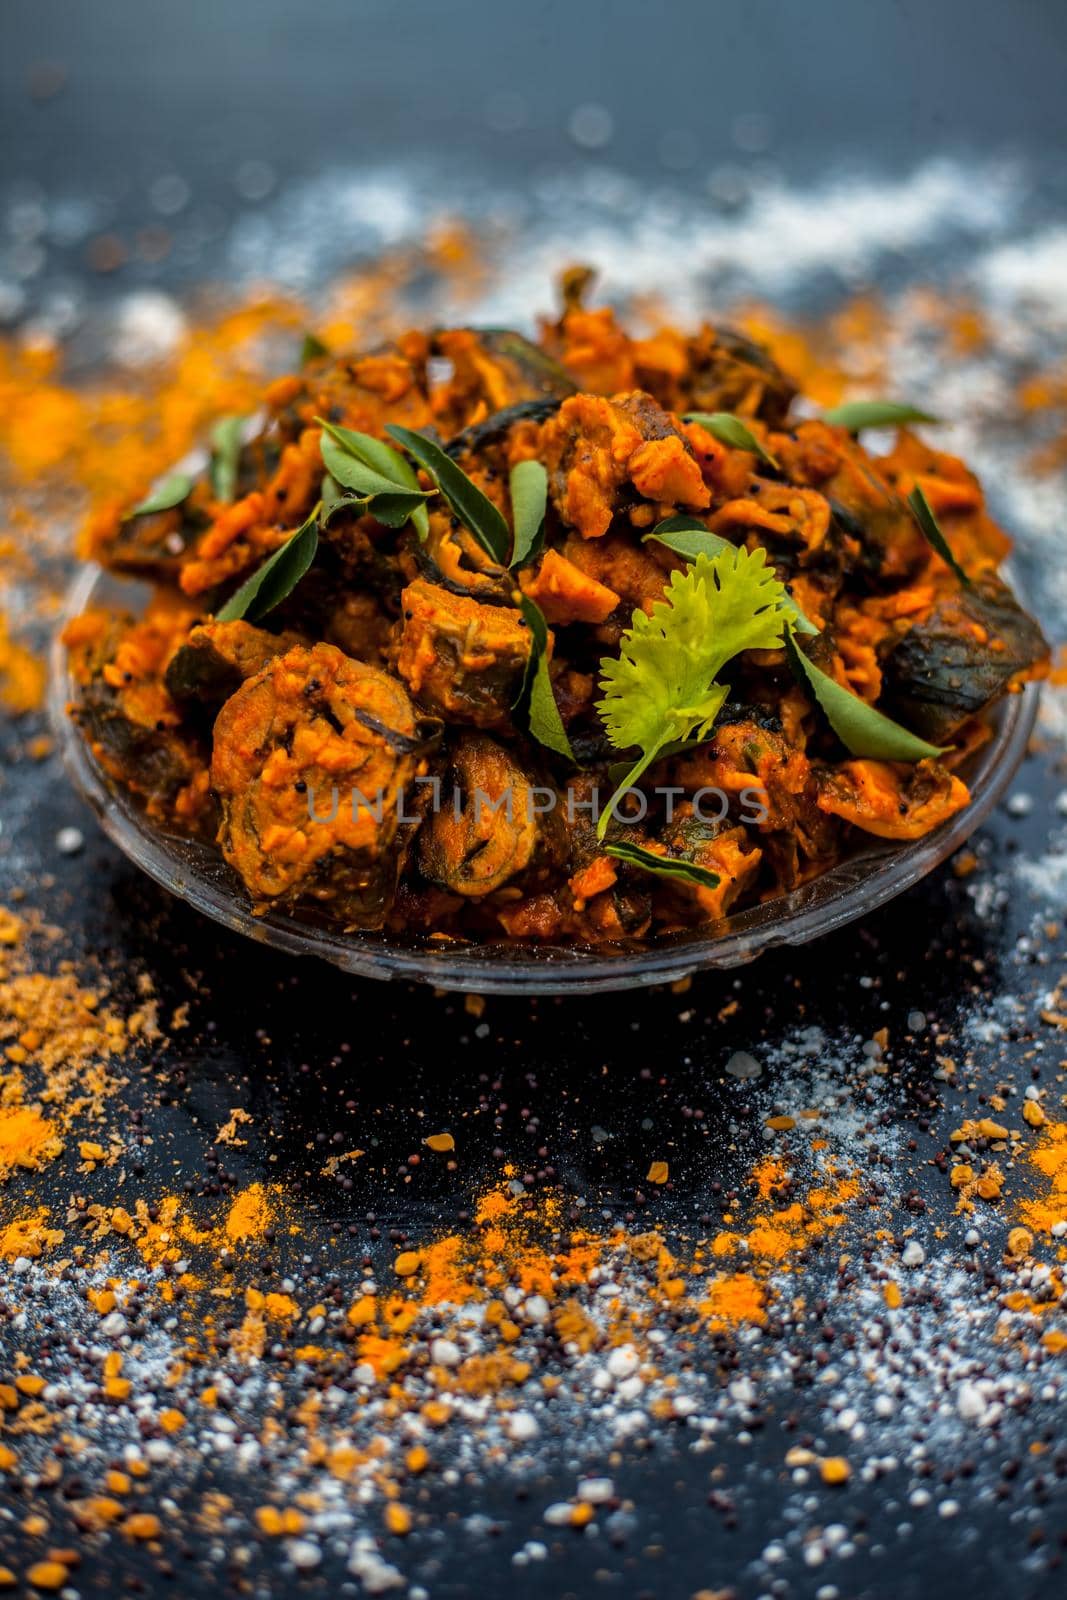 Famous Indian & Gujarati snack dish in a glass plate on wooden surface i.e. Patra or paatra consisting of mainly Colocasia esculenta or arbi ke pan or elephant ear leaves and spices. Vertical shot.